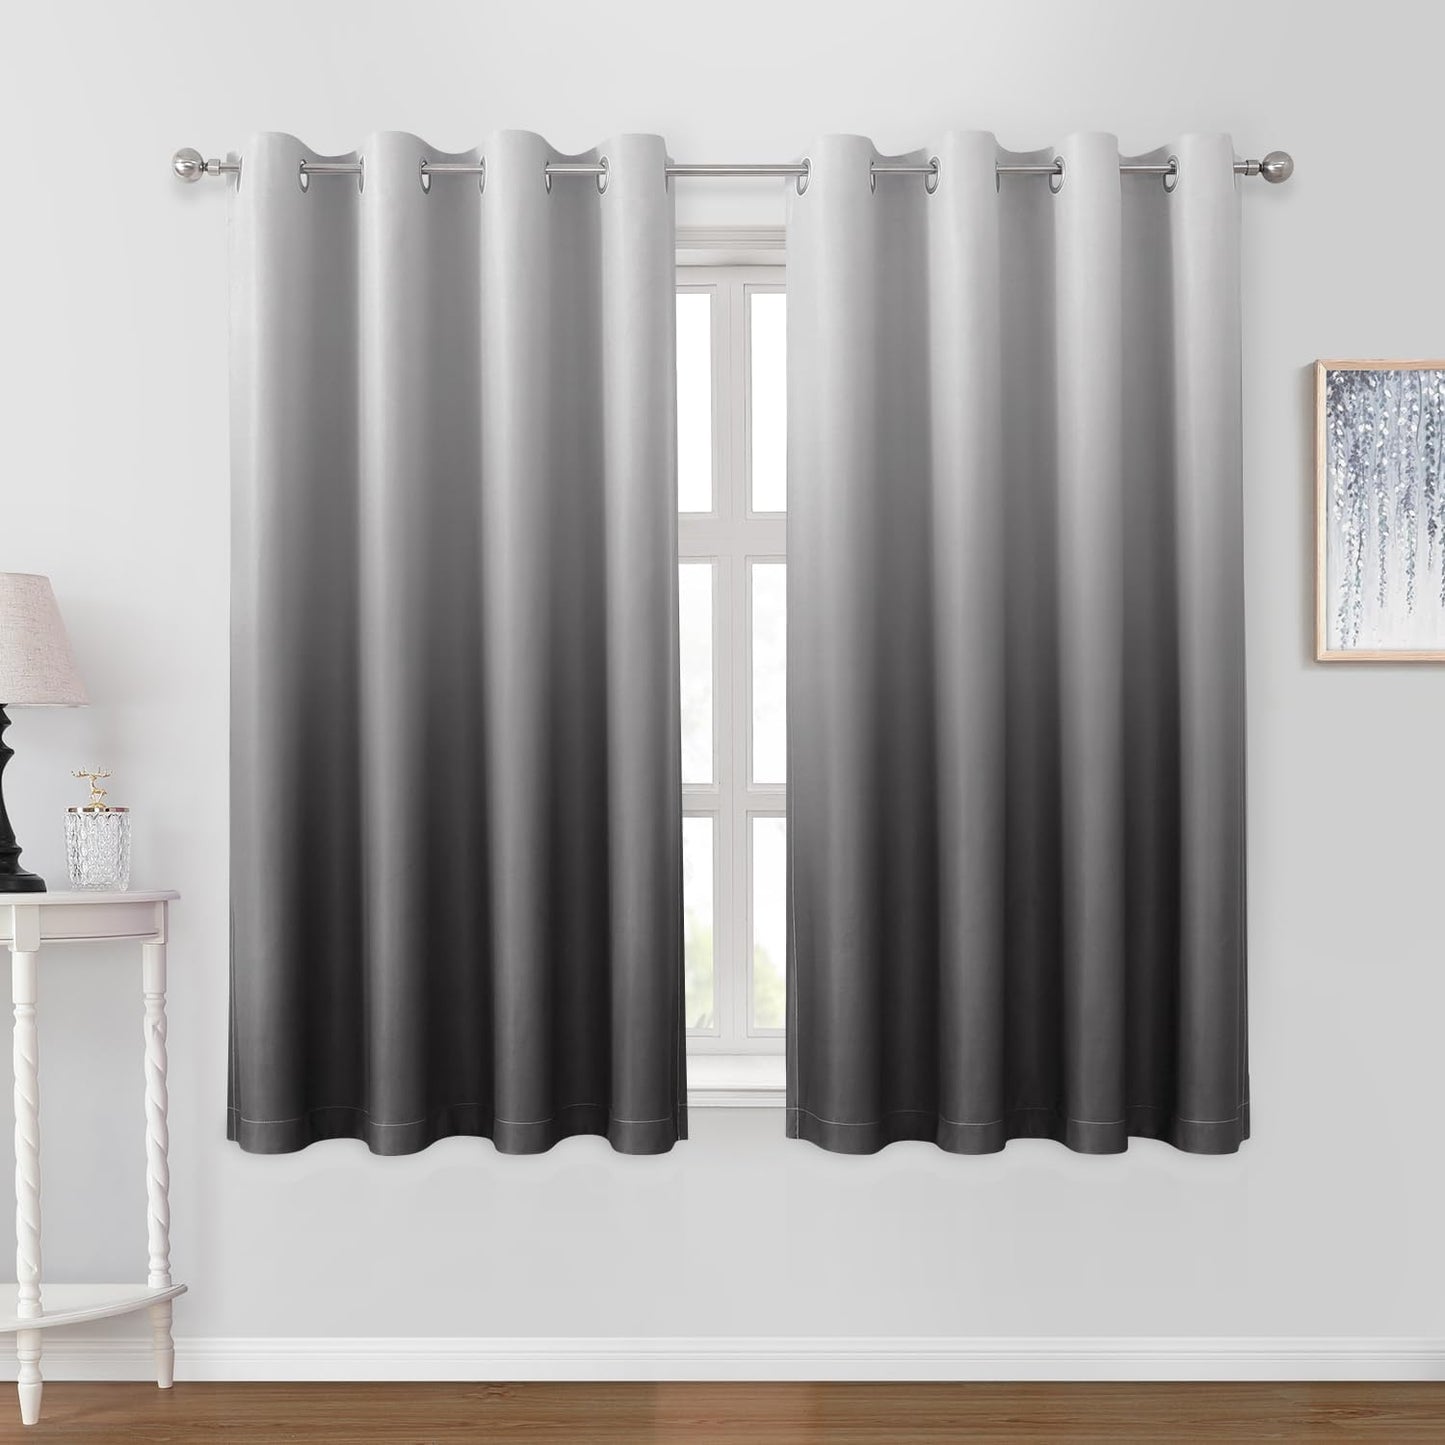 HOMEIDEAS Navy Blue Ombre Blackout Curtains 52 X 84 Inch Length Gradient Room Darkening Thermal Insulated Energy Saving Grommet 2 Panels Window Drapes for Living Room/Bedroom  HOMEIDEAS Grey 52"W X 63"L 